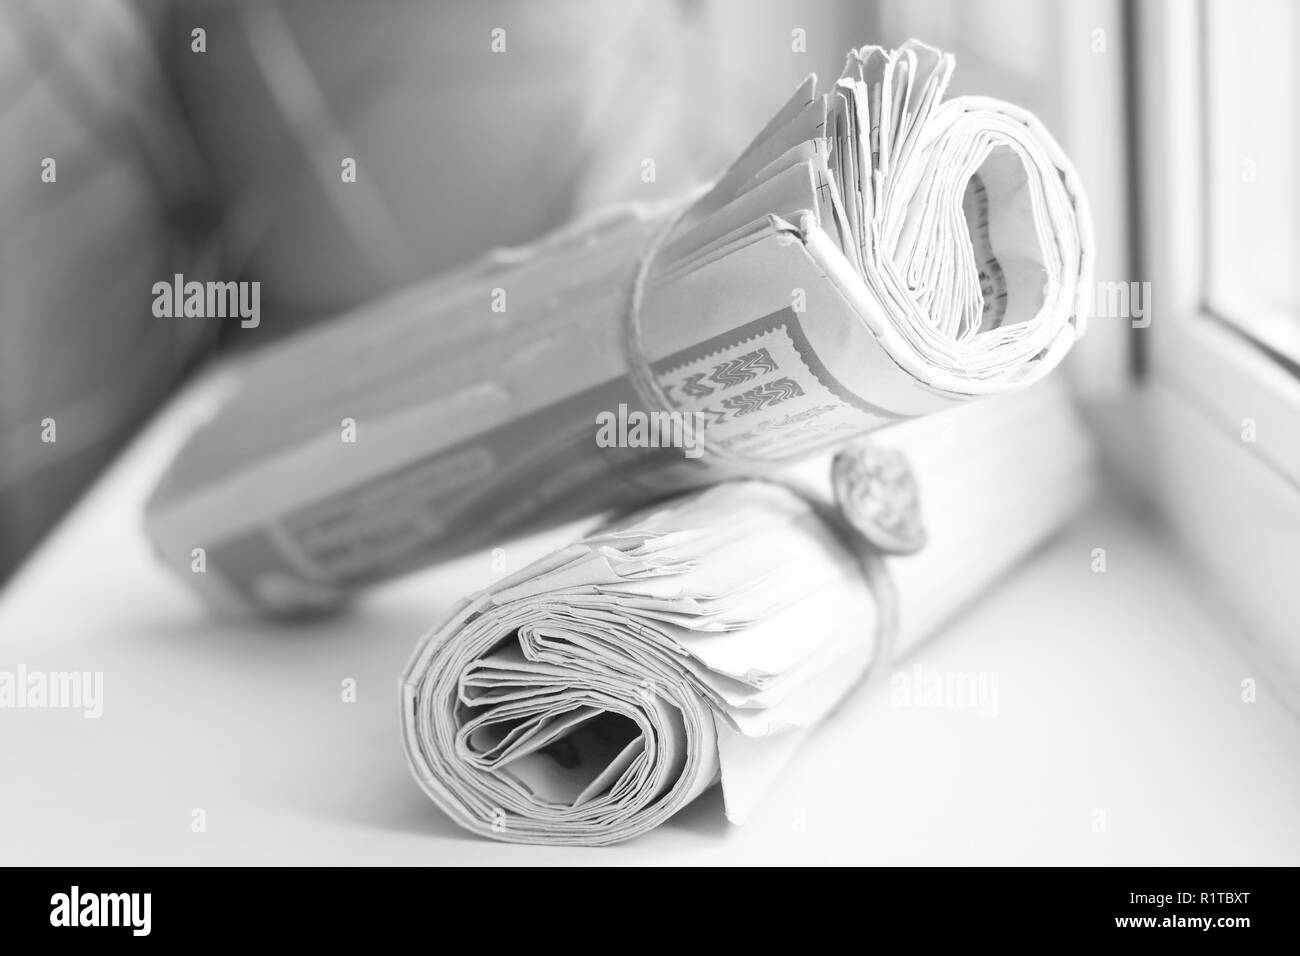 Two rolled newspapers with headlines and articles, concept for business news Stock Photo